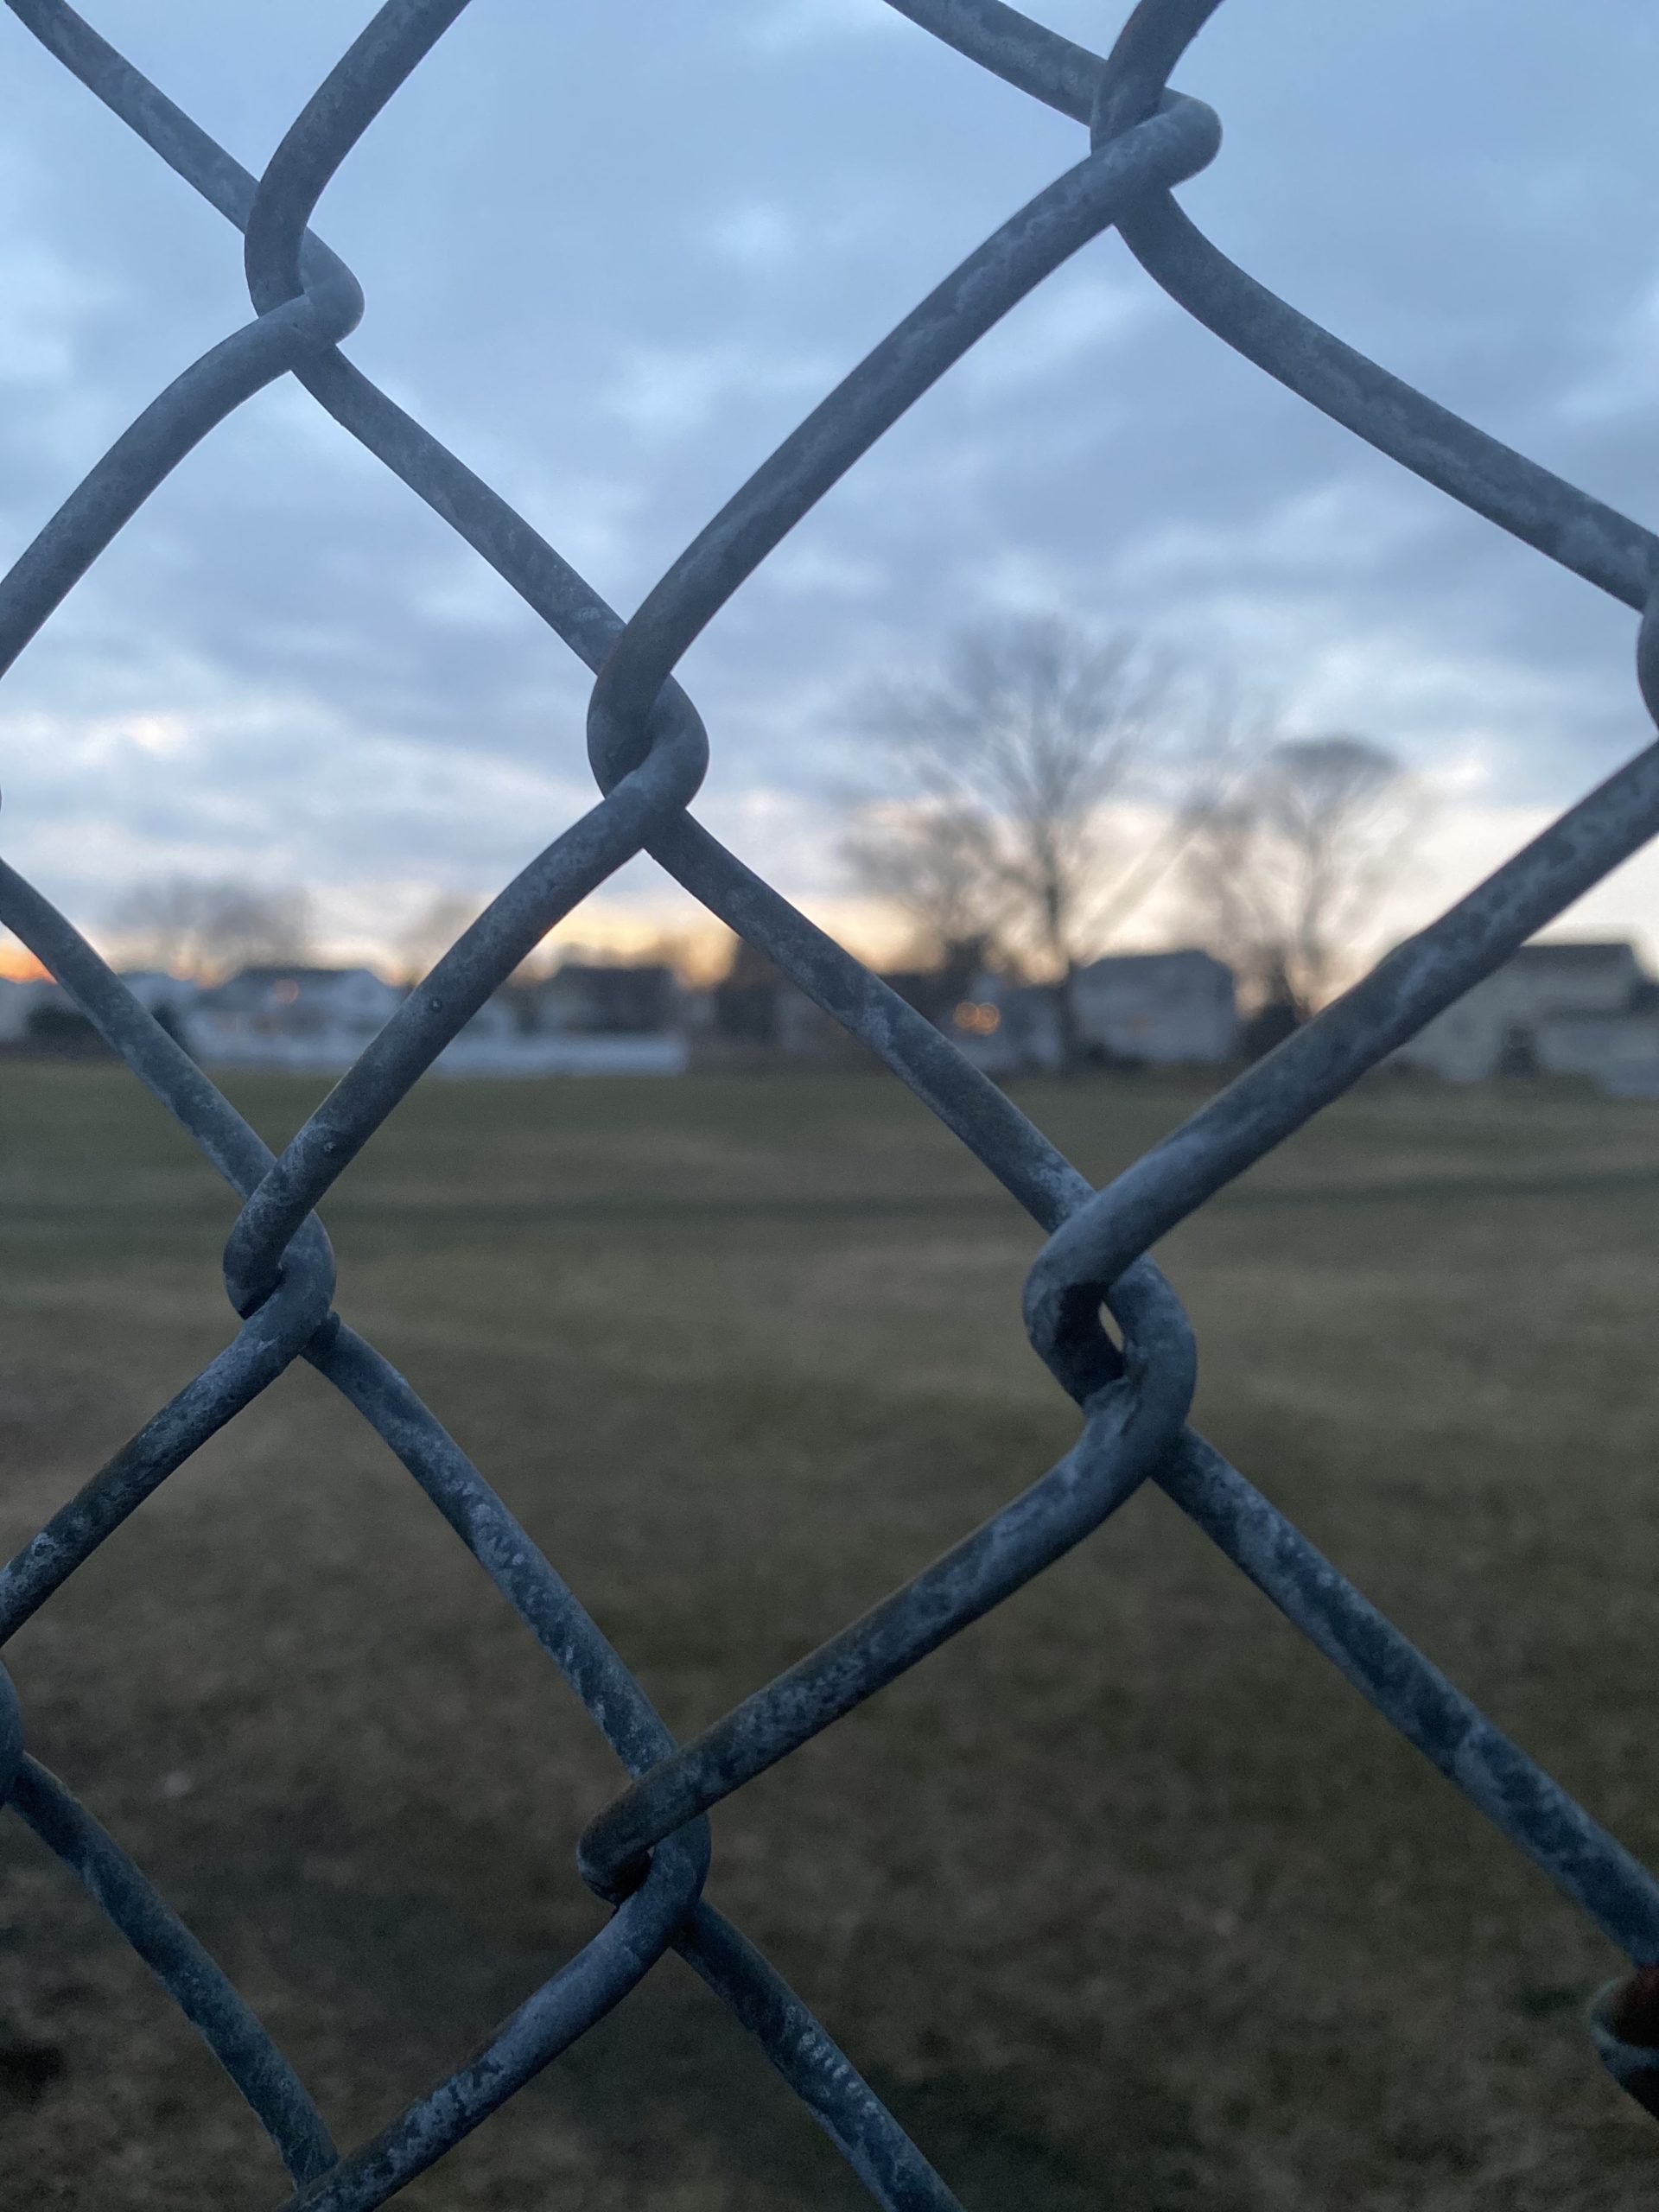 Photograph of chain link fence